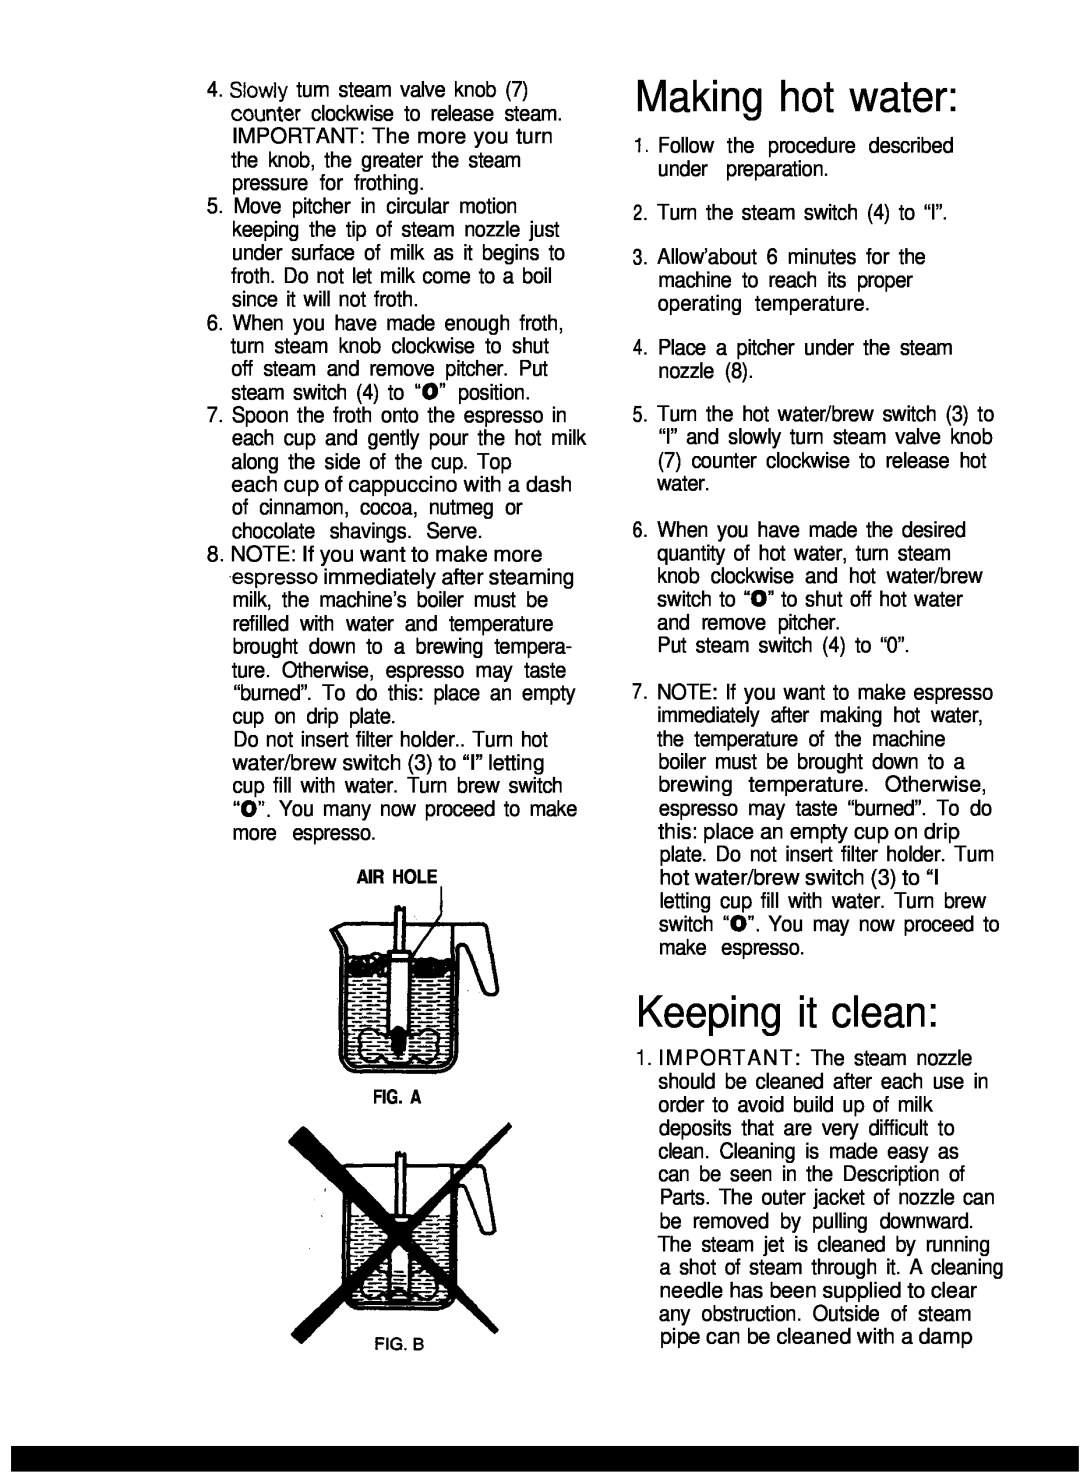 Gaggia Expresso/Cappuccino Makers manual Making hot water, Keeping it clean 